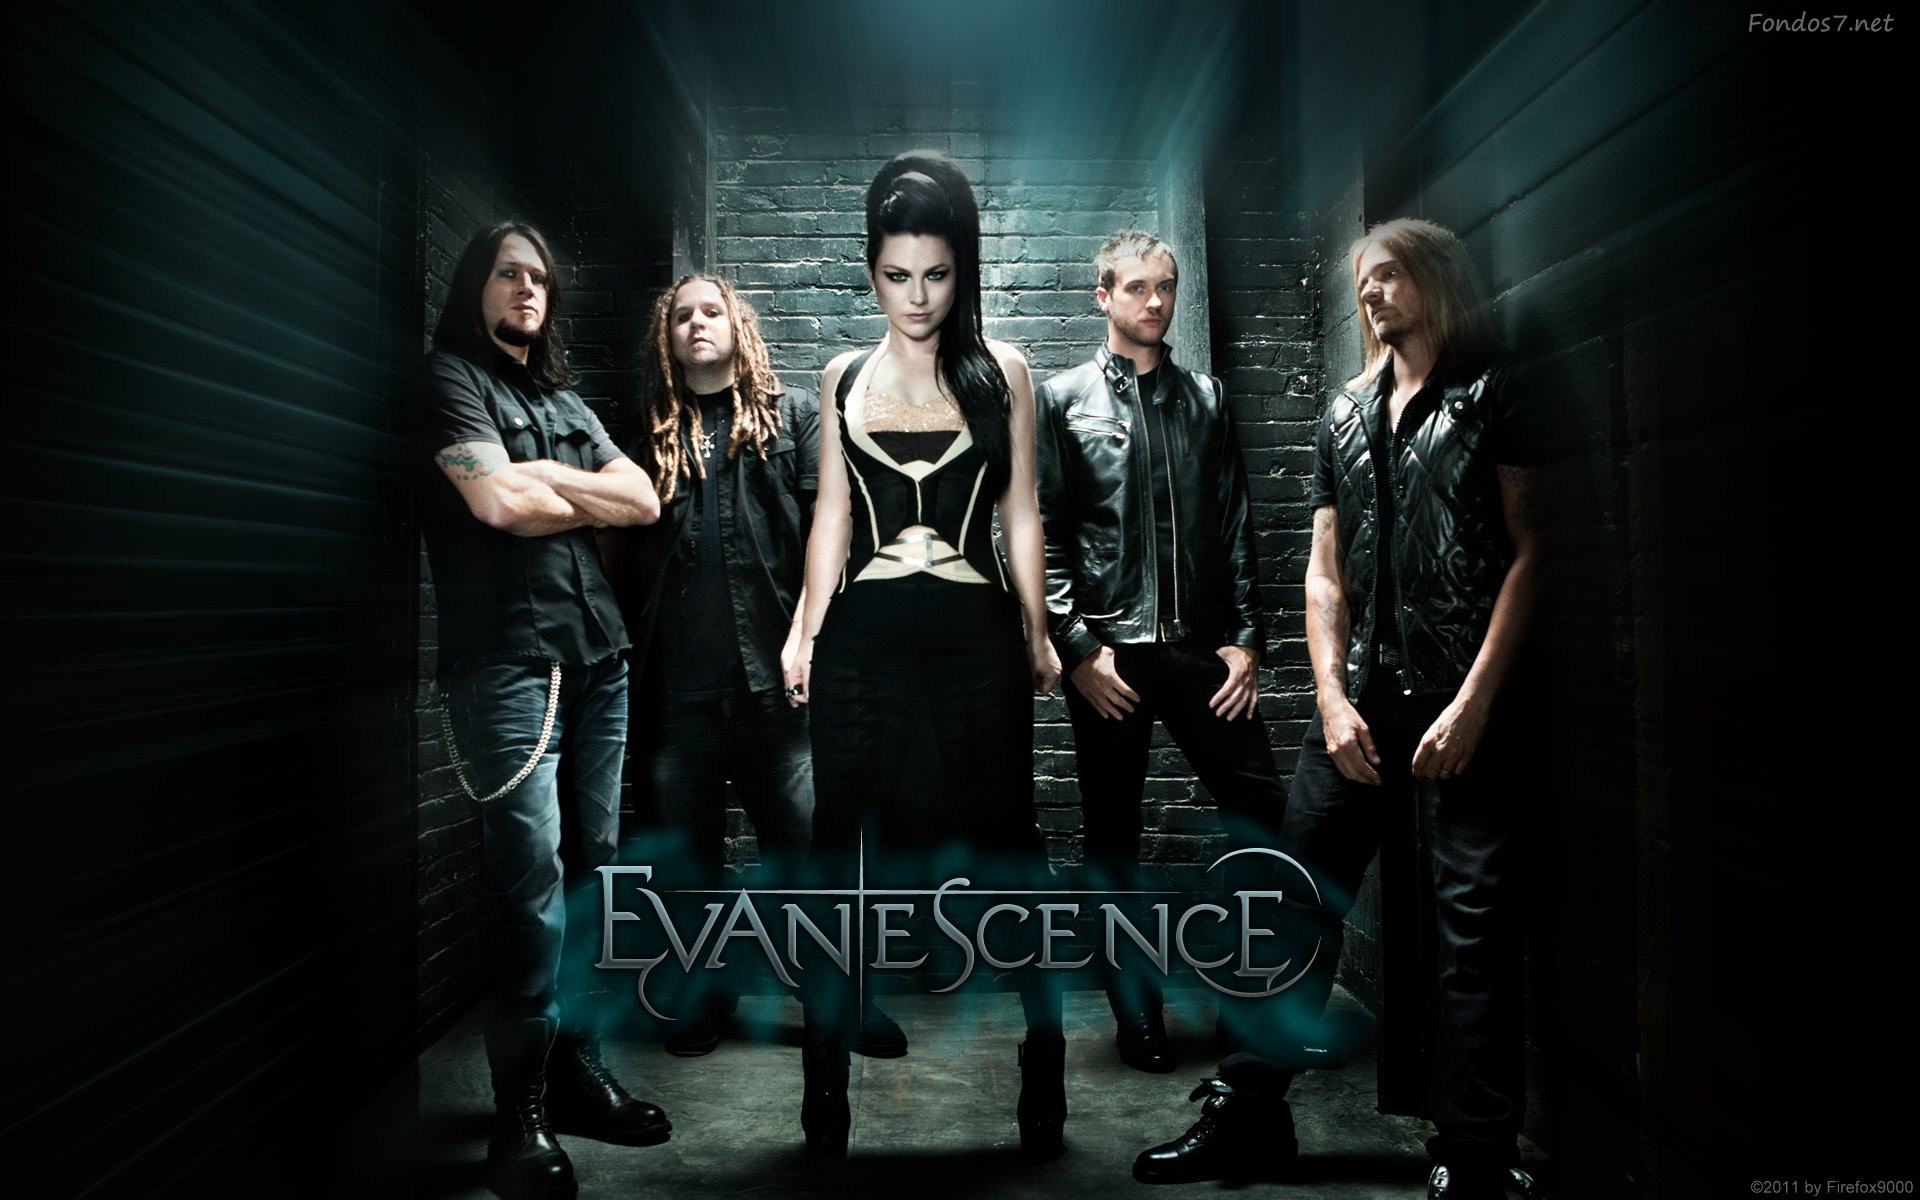 The group Evanescence